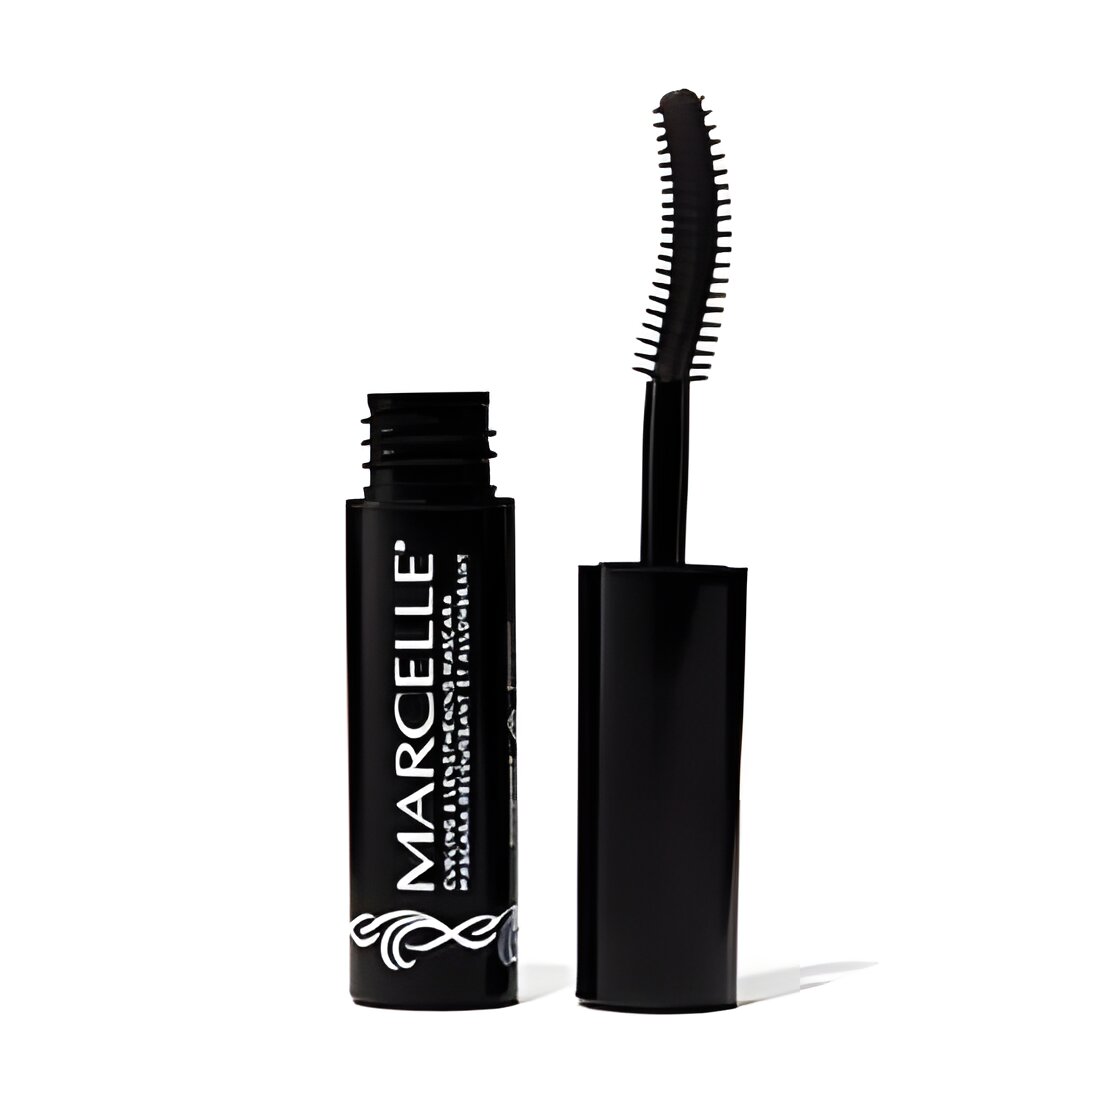 Free Marcelle Xtension Plus Curl Mascara Deluxe Dample